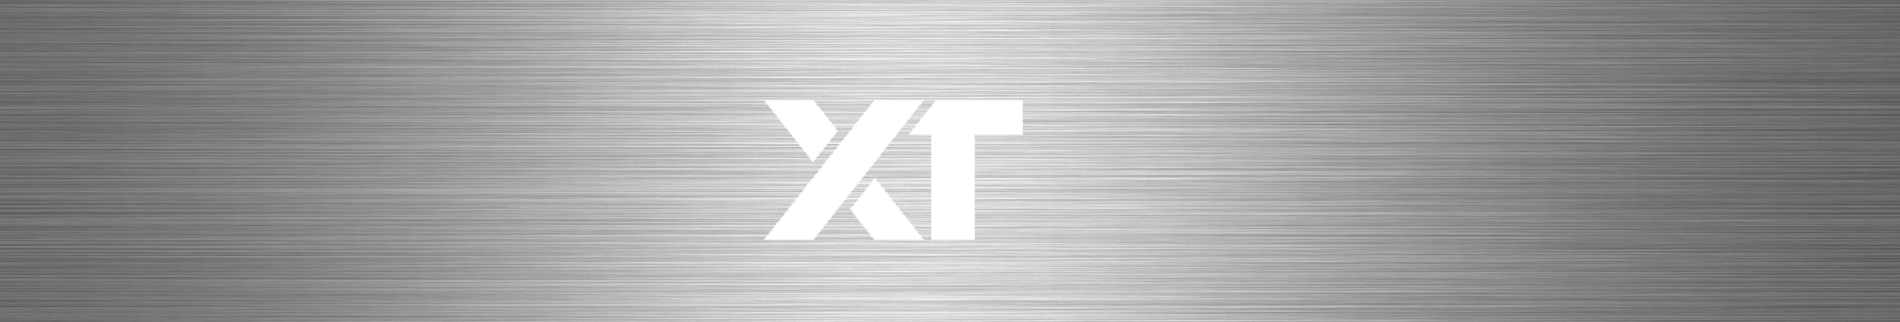 Brushed metal background with XT logo